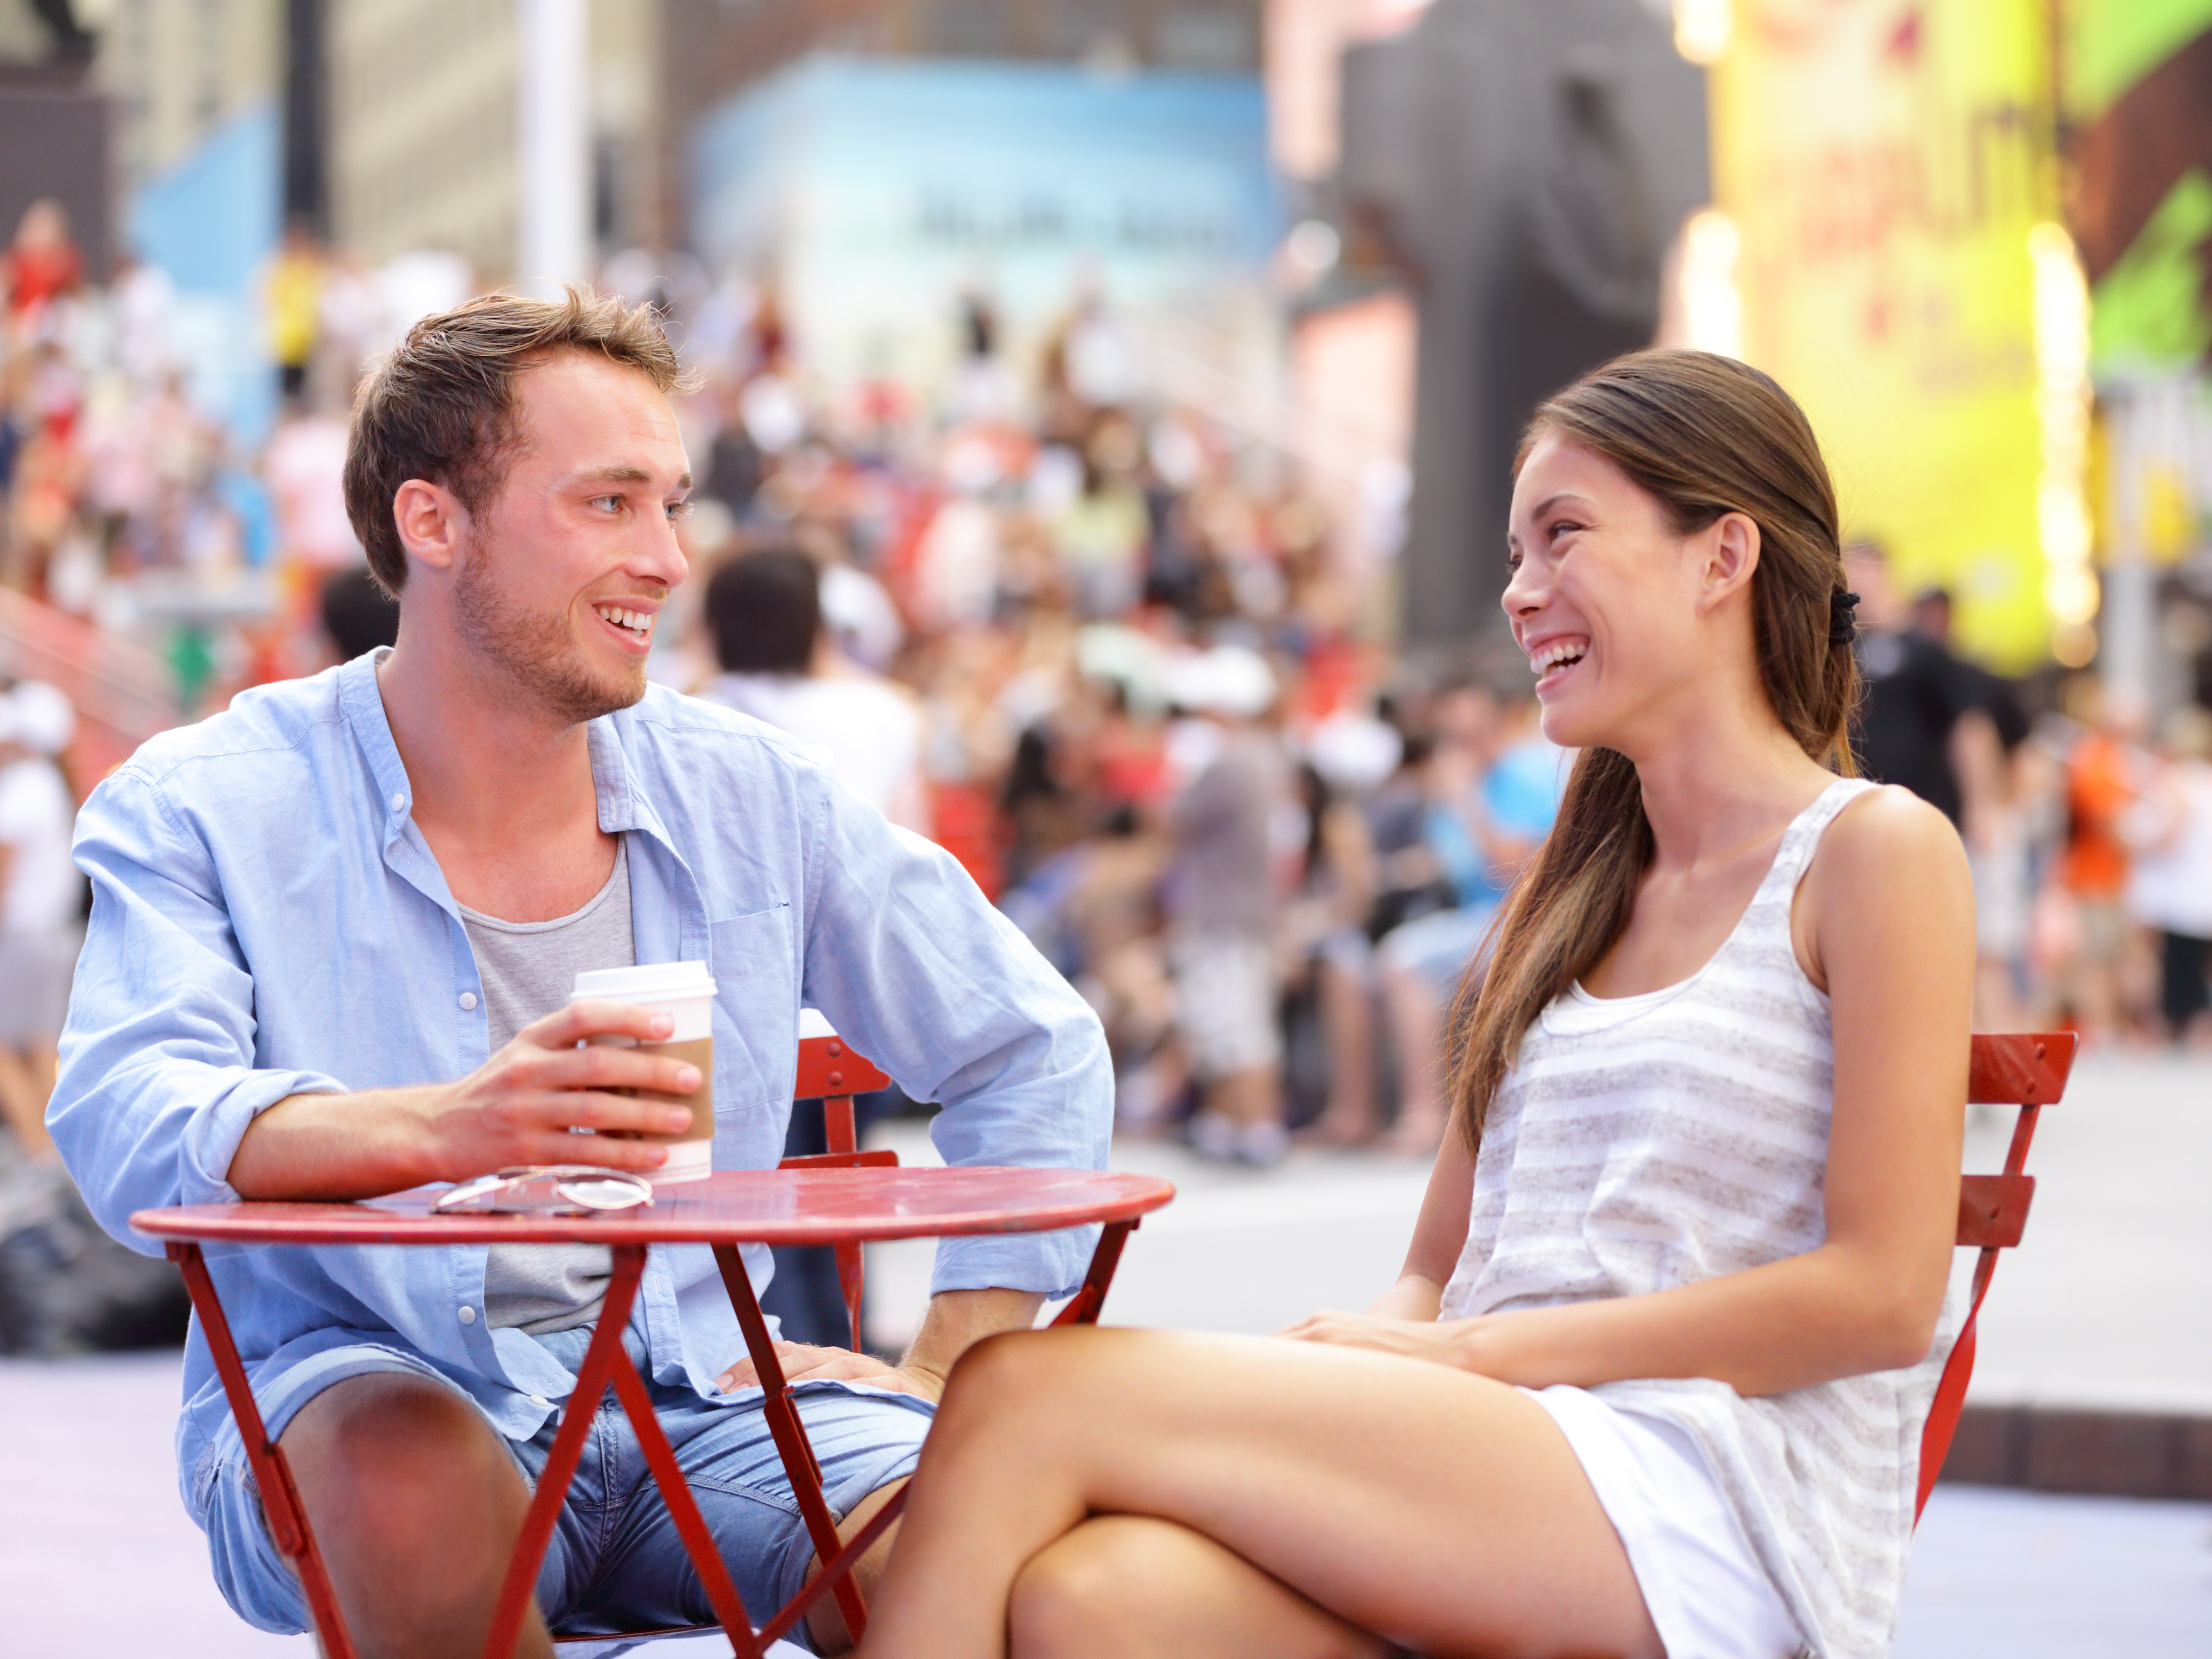 Dating couple, New York, Manhattan, Times Square dating drinking coffee smiling happy sitting at red tables enjoying their tourism vacation travel in the USA. Asian woman, Caucasian man.